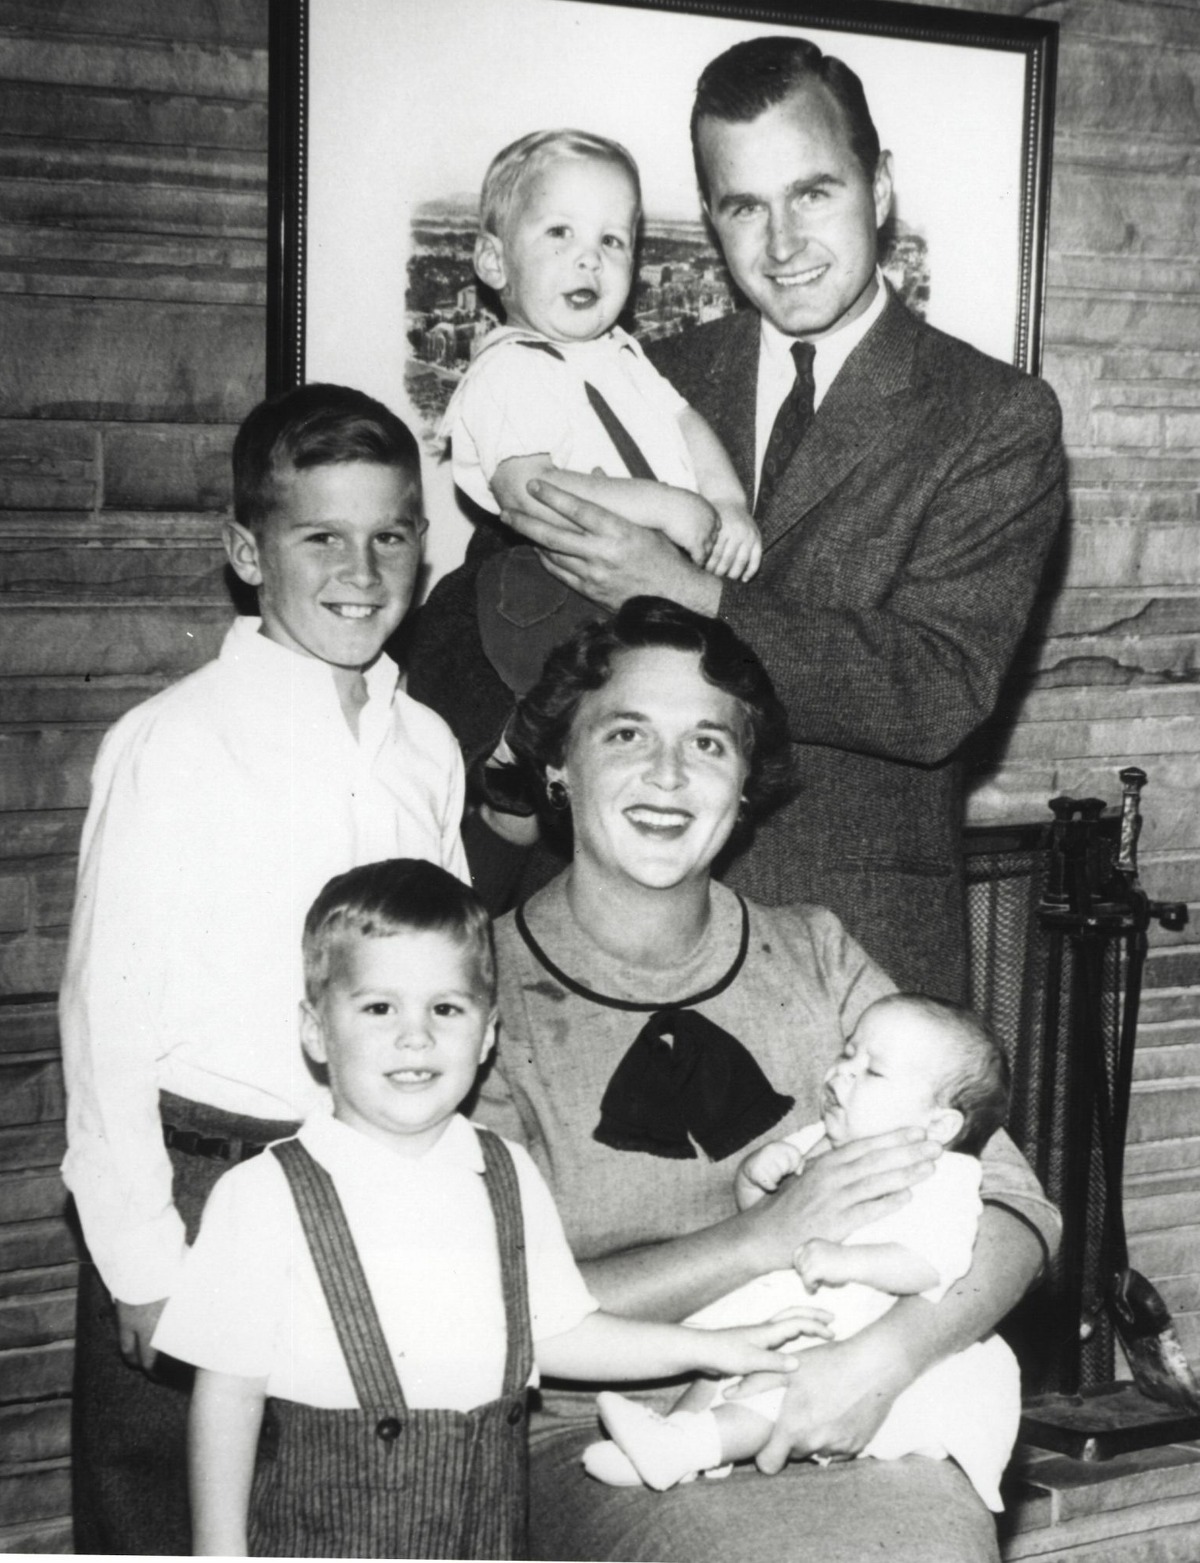 Barbara and George Bush with their children (L-R) Dorothy, Neil, Marvin, Jeb and George. Fact: In 1953, daughter Pauline Robinson Bush passed away at age 3 of leukemia. Their deceased daughter was named after Barbara's mother who passed away in a fatal car accident in 1949.